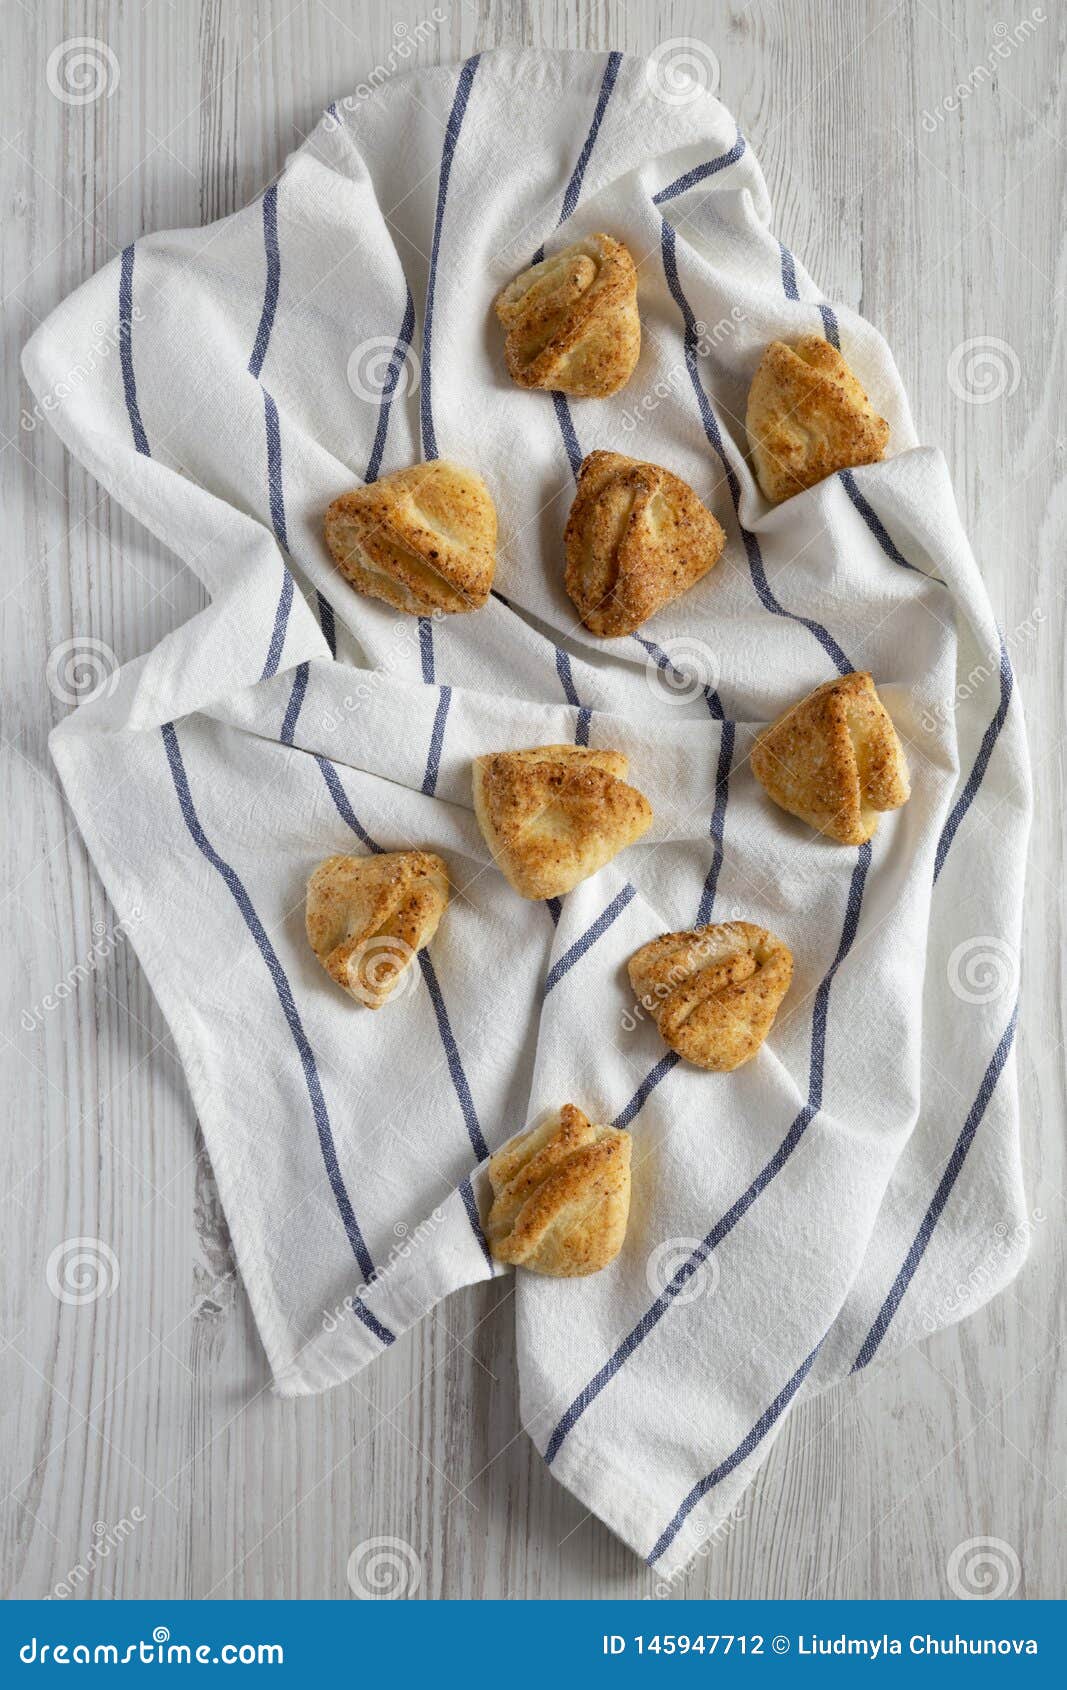 Home Baked Cottage Cheese Biscuits On Cloth Over White Wooden